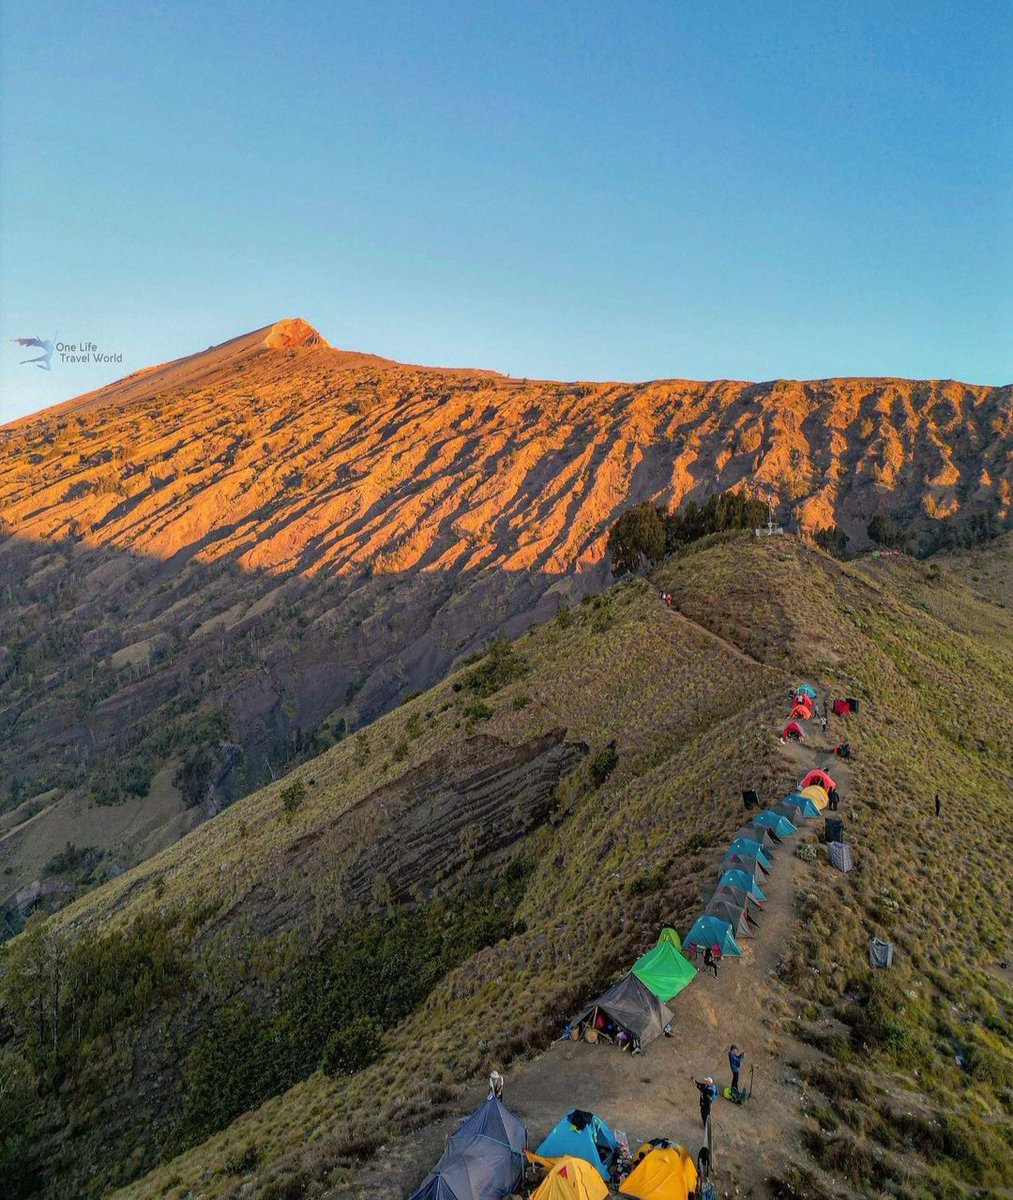 Do you looking for the trekking company where you can book your planning for hiking in mount Rinjani. Here is the trekking agencies online offers the Rinjani trekking package very affordable price and great trek service. Find our info at lunerinjani.com